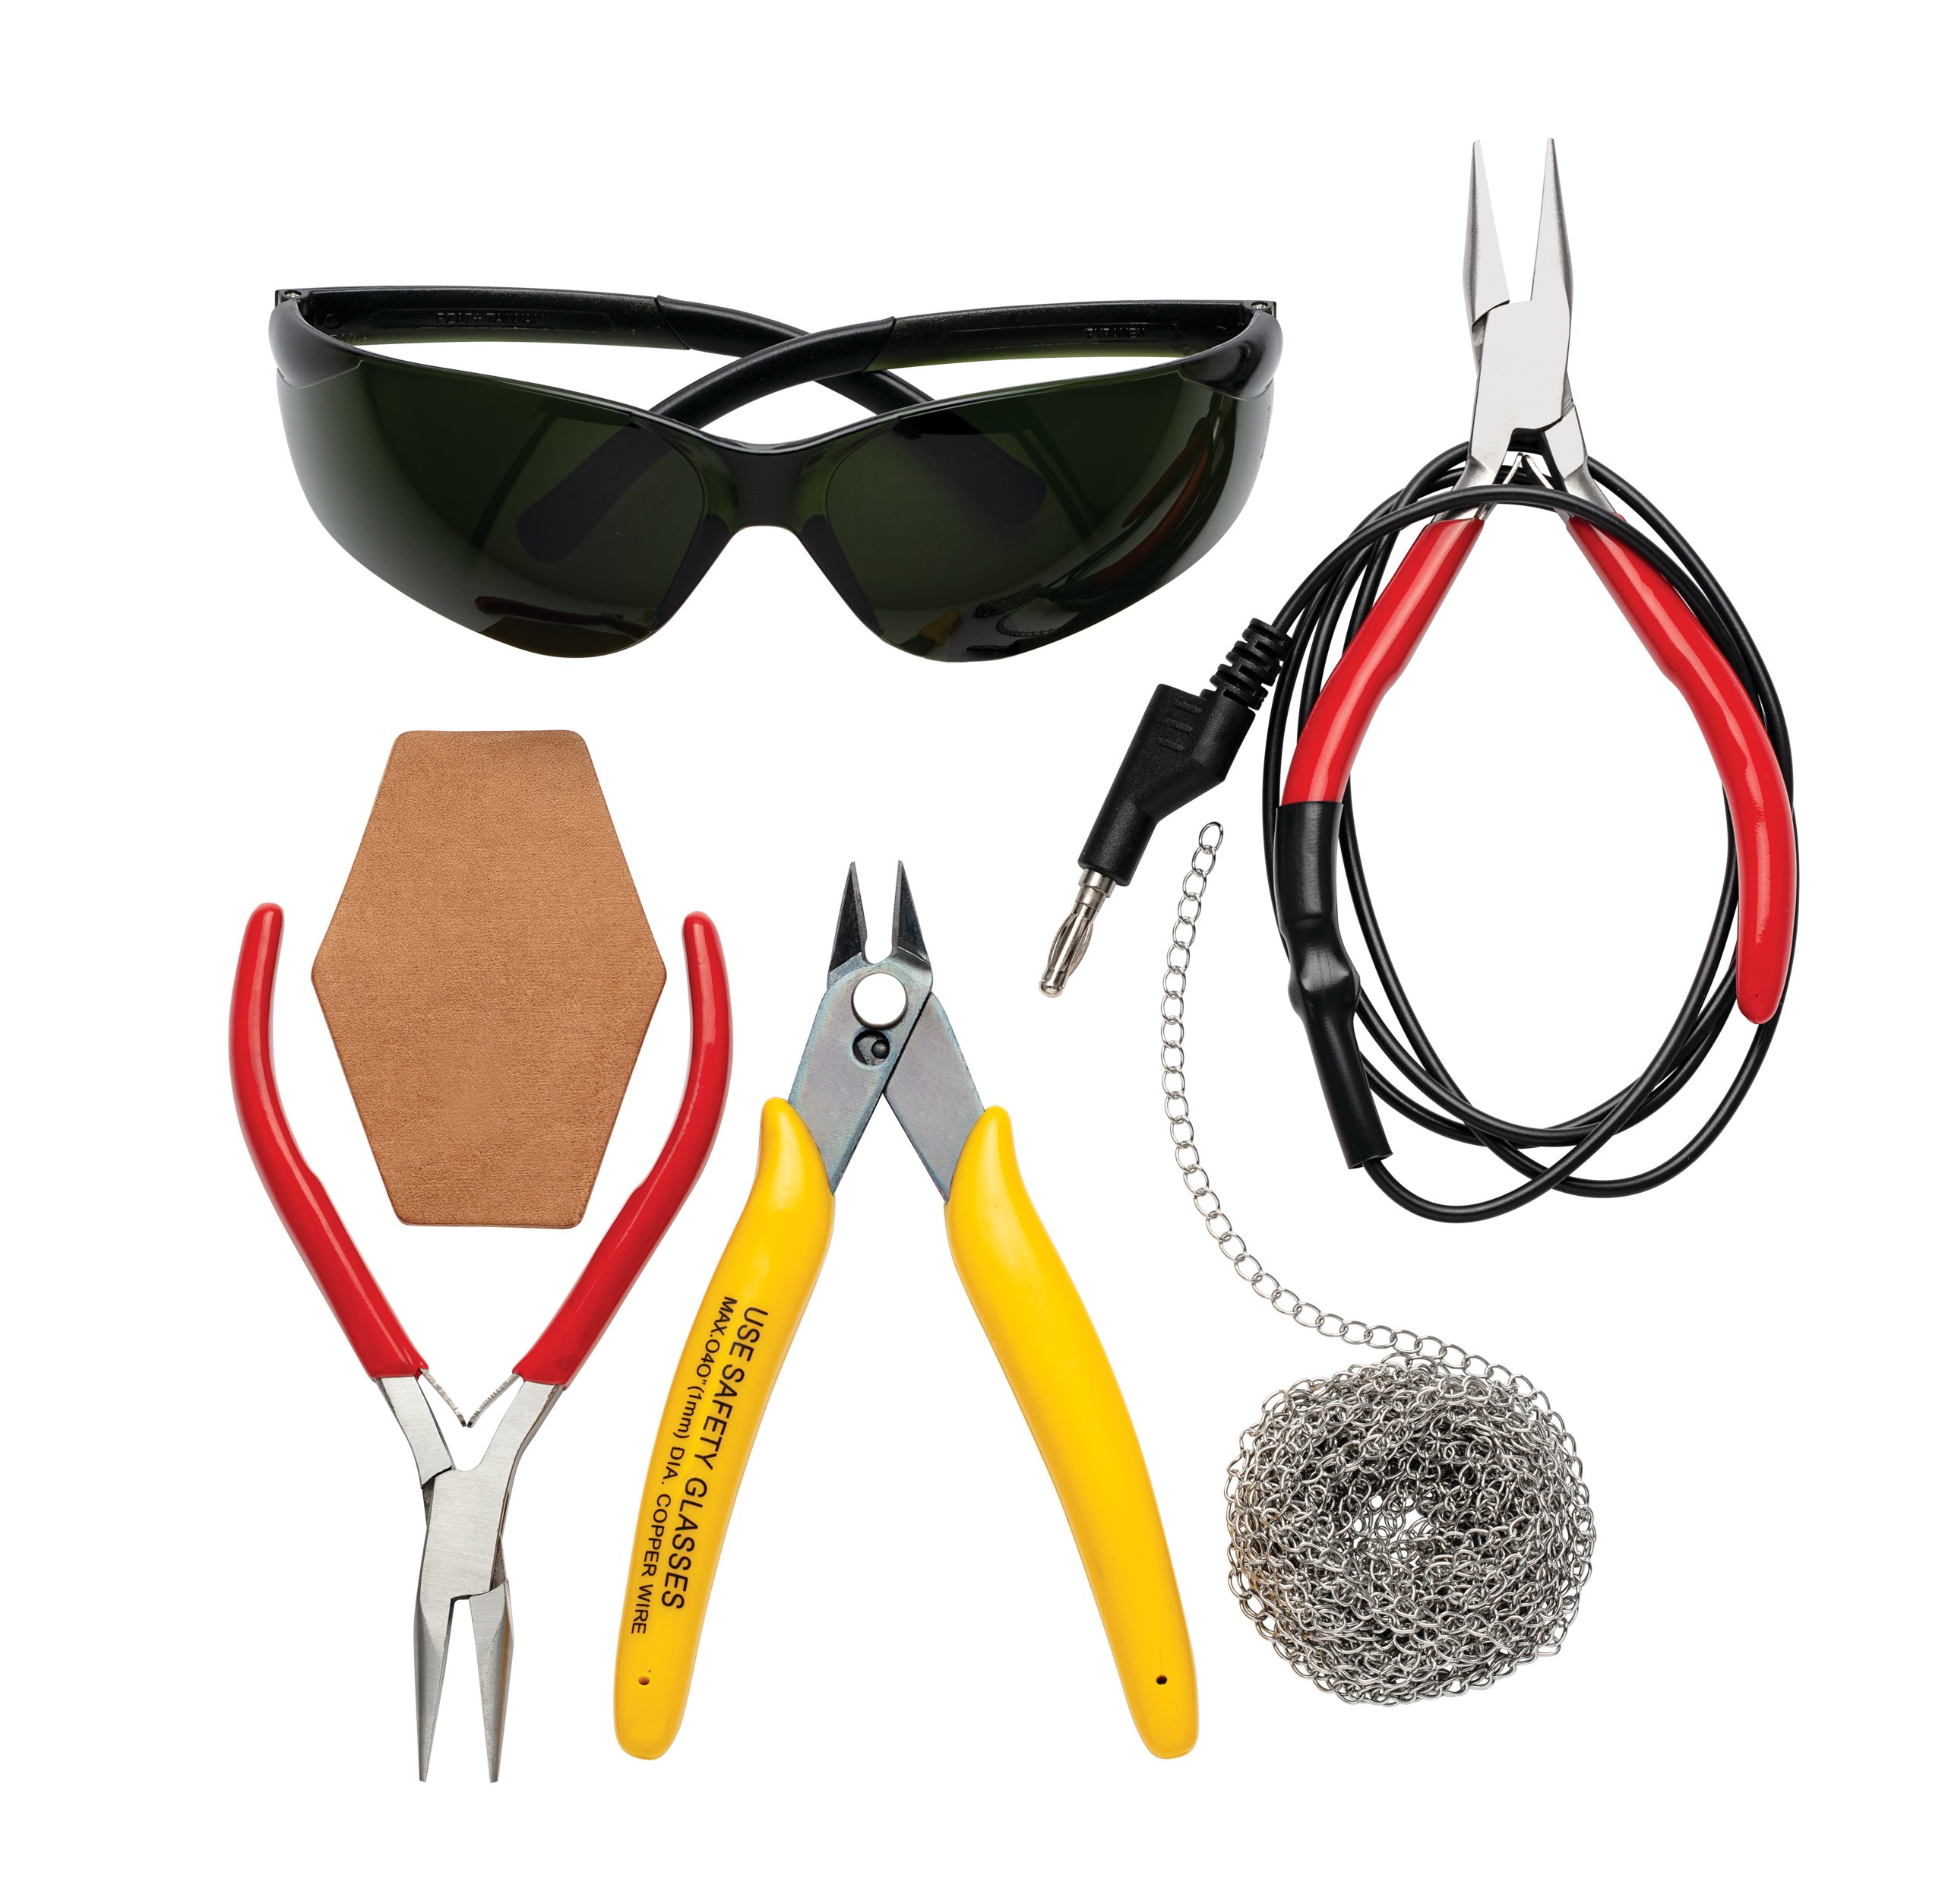 Permanent Jewelry Kit with Orion PJ Pulse-Arc ADL Welding System - RioGrande